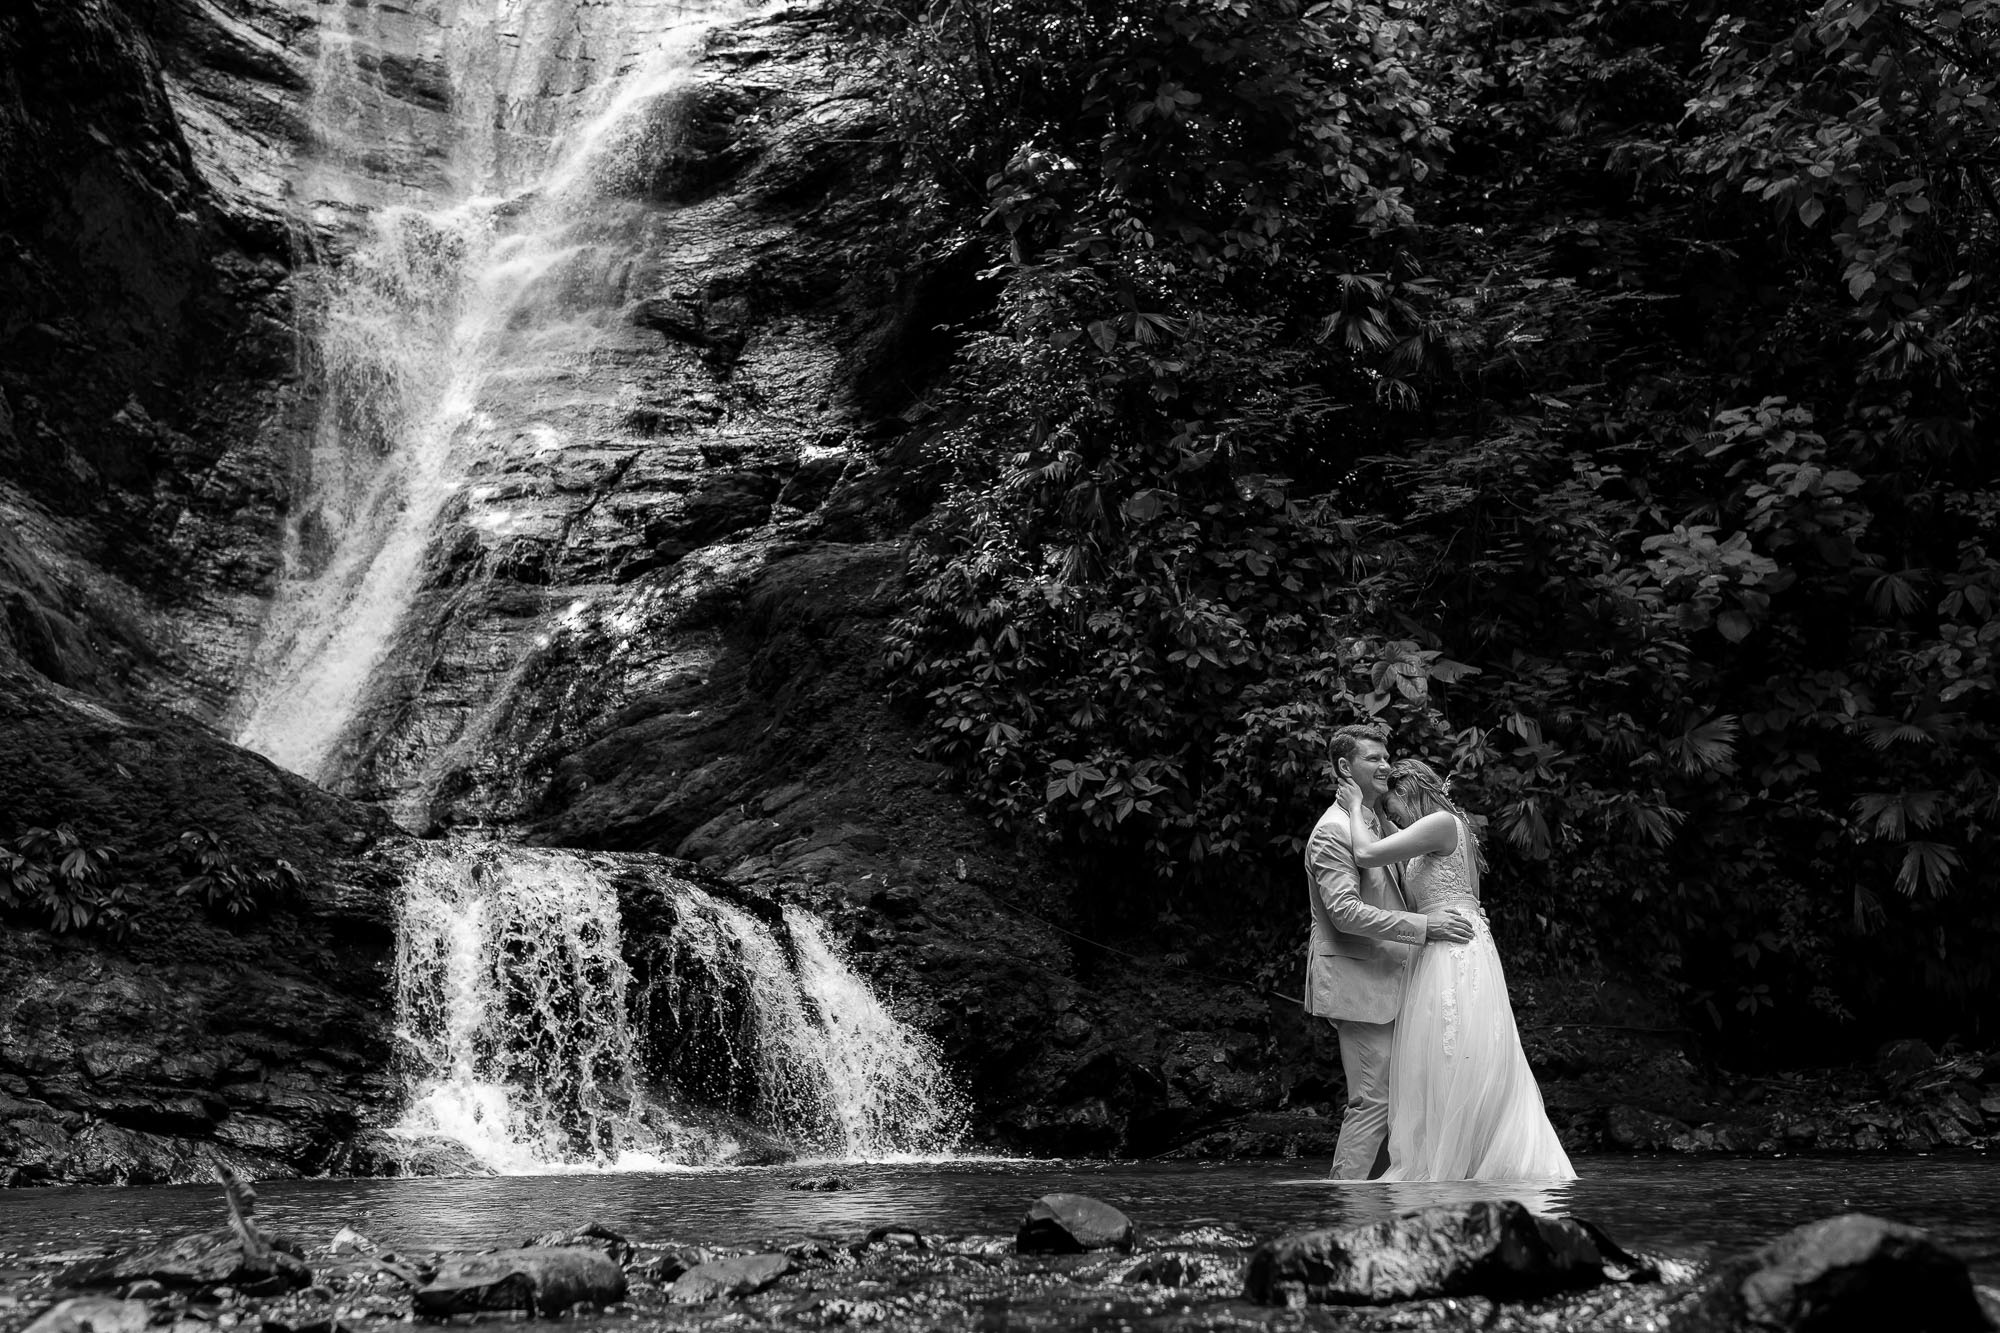 Waterfall wedding: bride and groom in the water